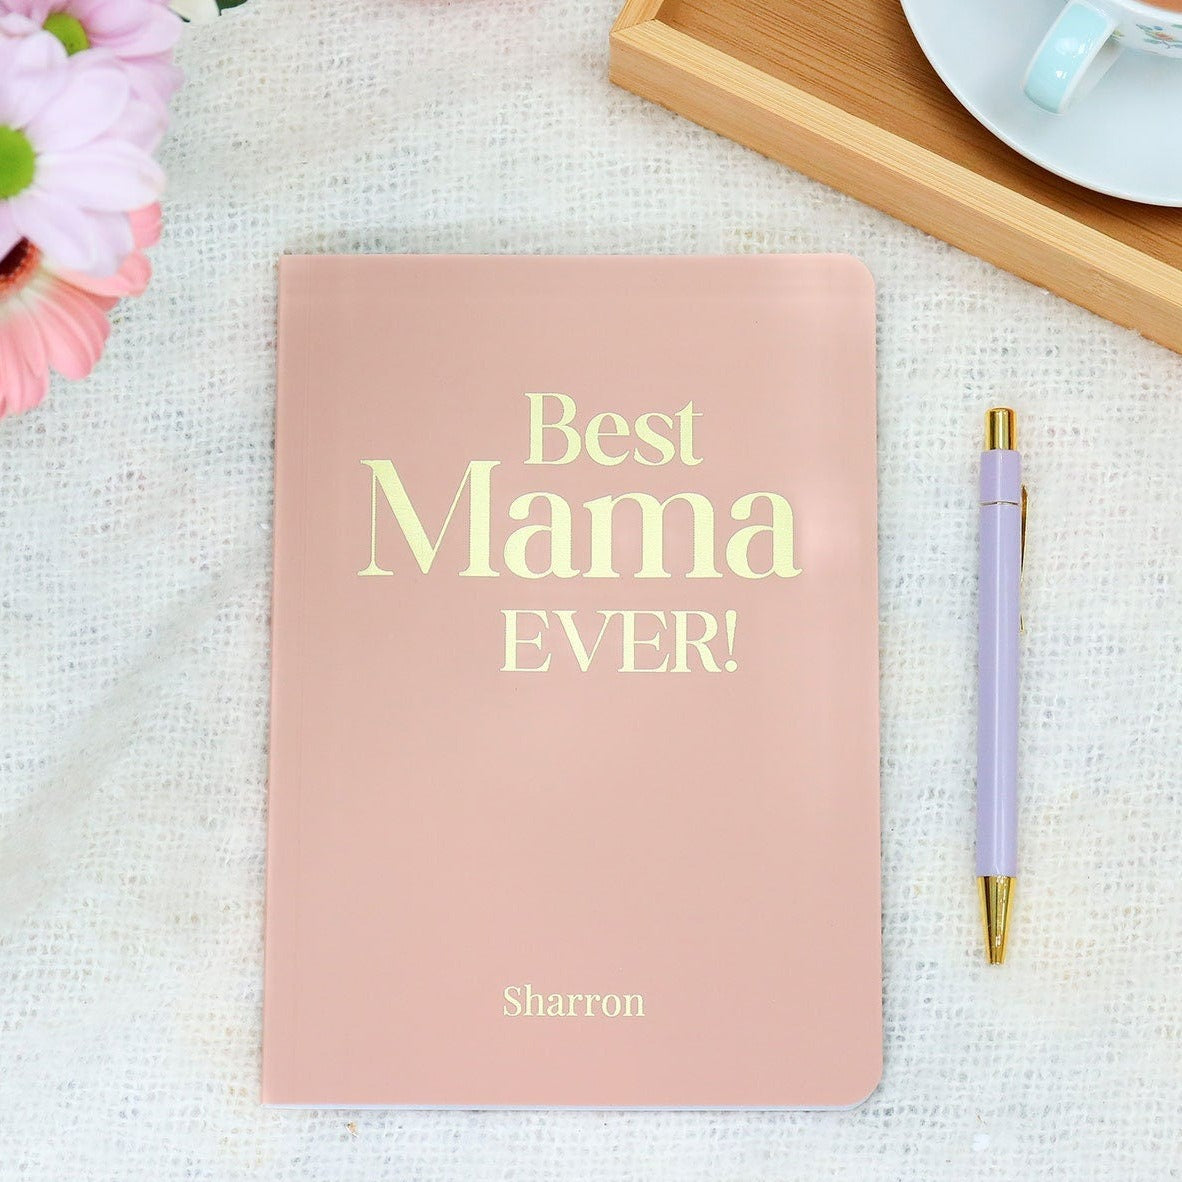 An A5 softback notebook in powder pink that says 'Best Mama Ever' with the name Sharron at the bottom all in gold foil